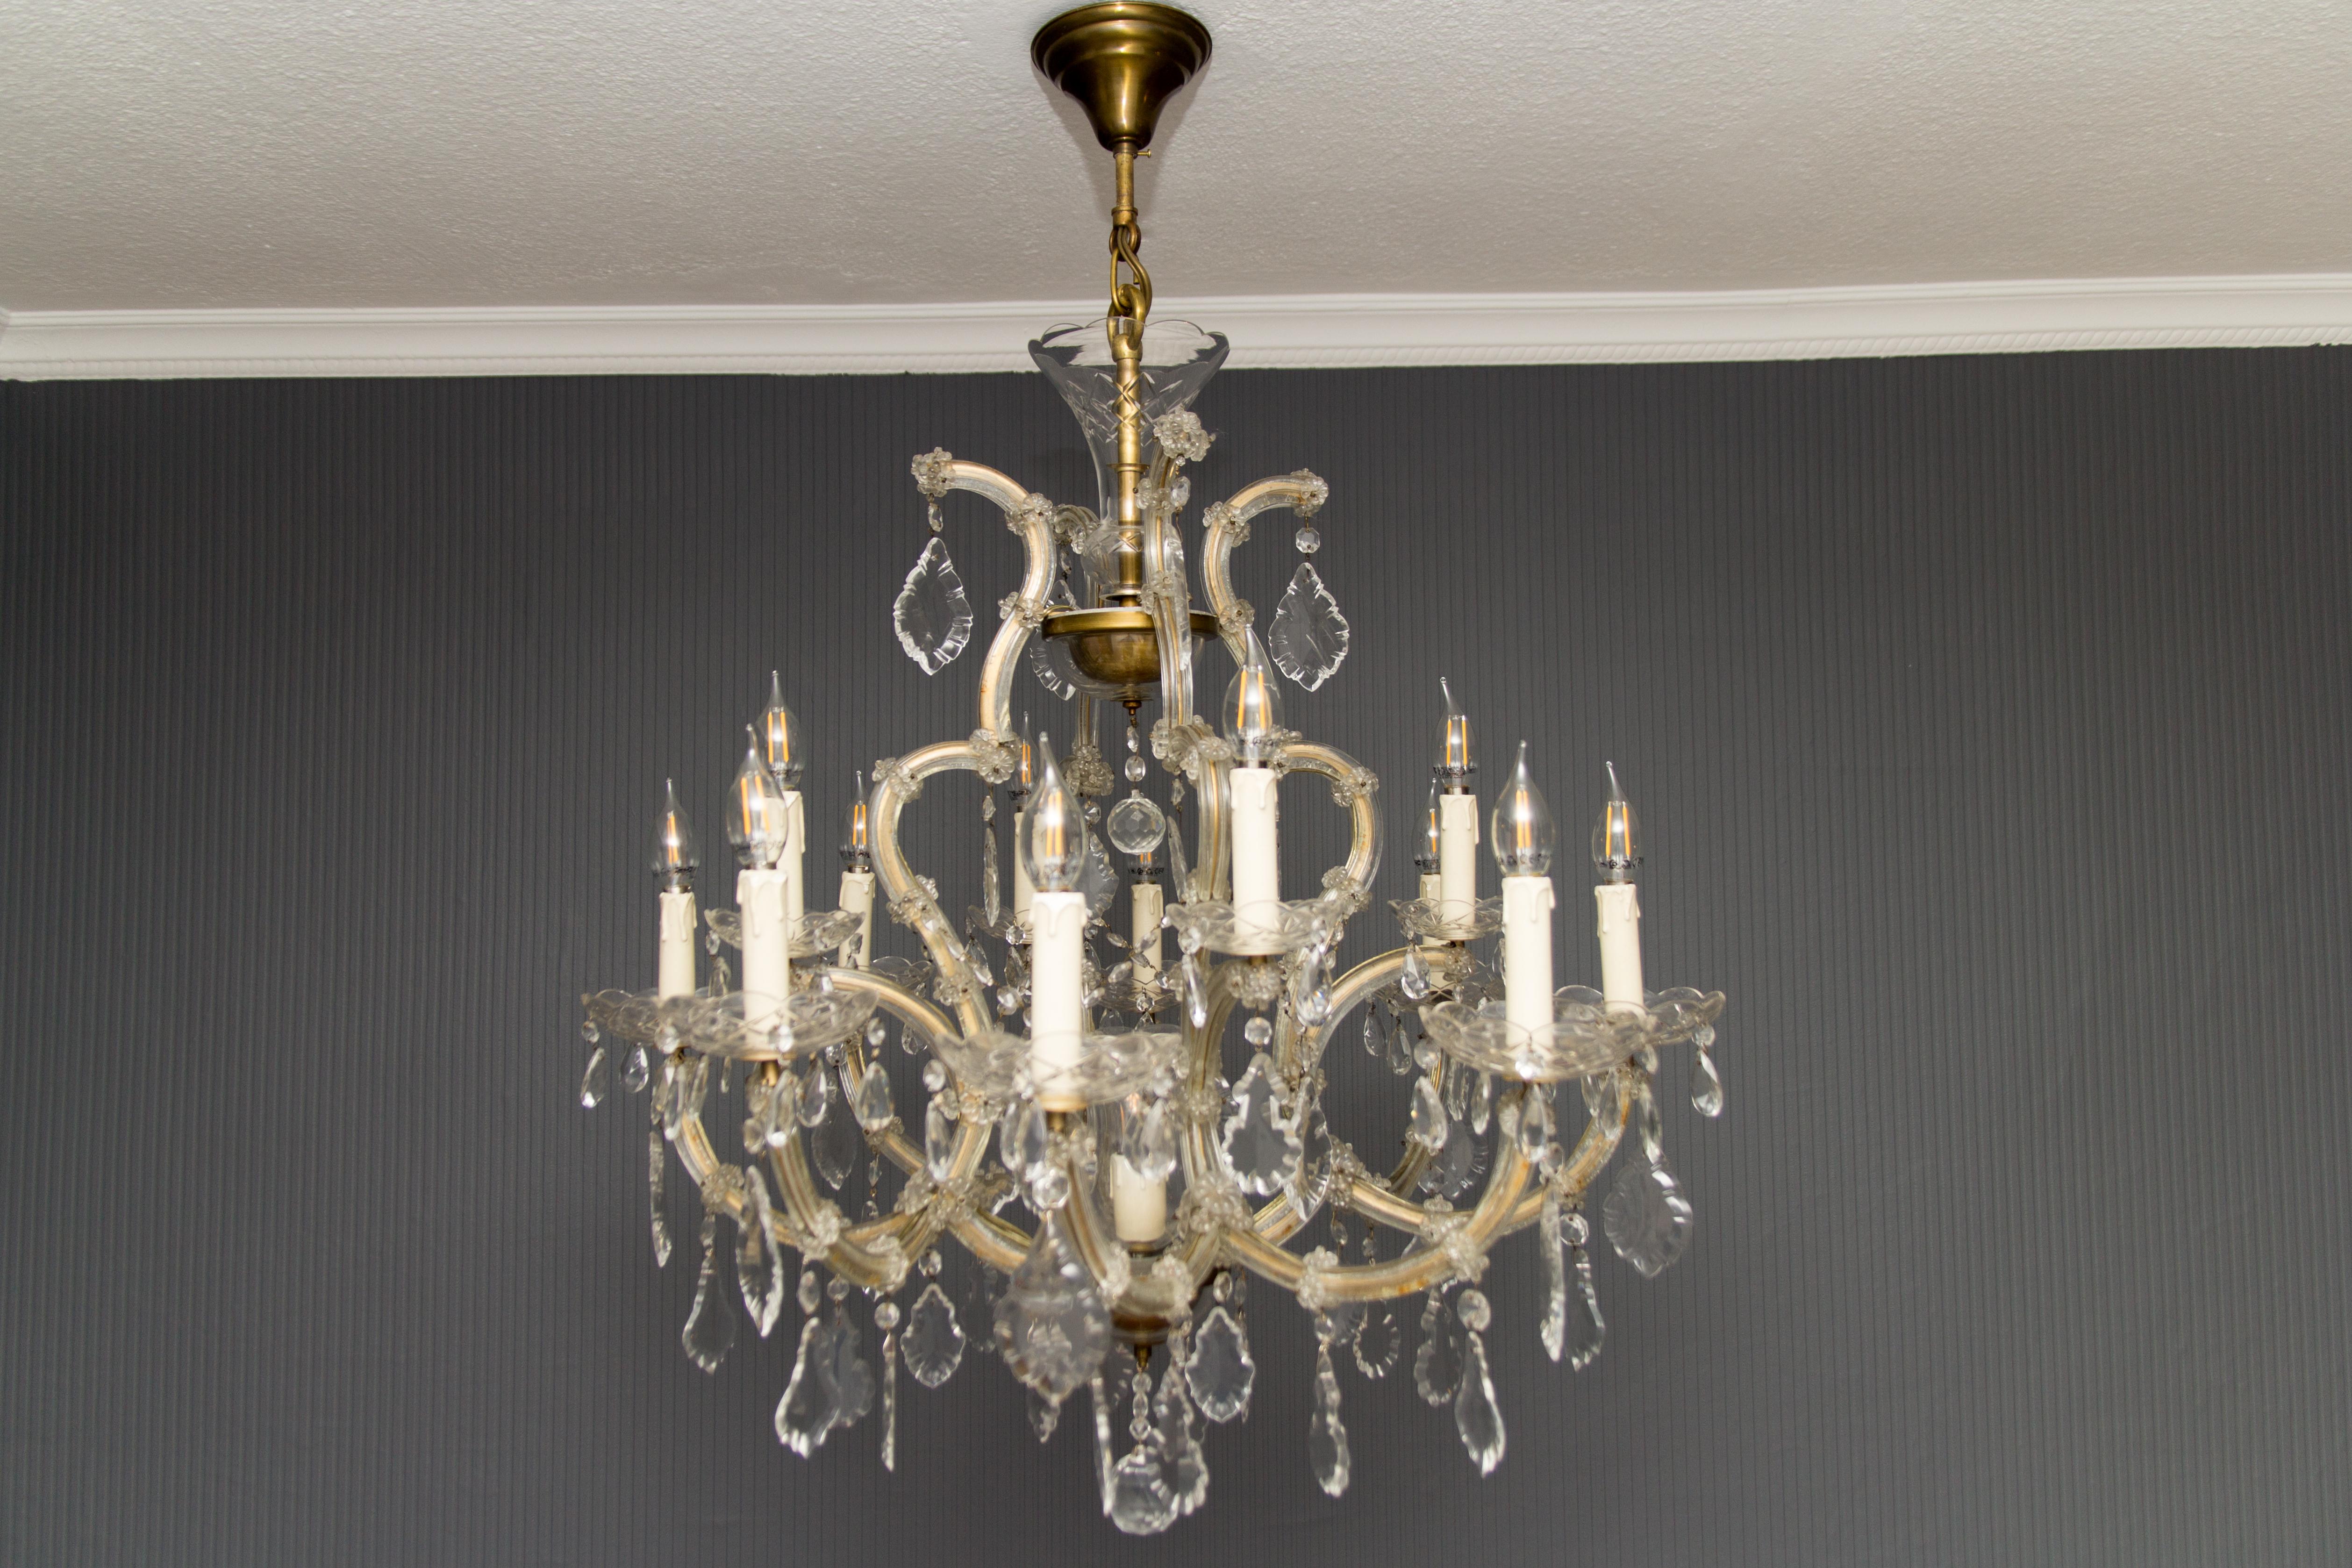 Beautiful Italian Maria Theresa style thirteen-light crystal chandelier. Brass and metal frame covered in glass with hanging crystal pendants, thirteen sockets for E14 light bulbs.
Dimensions: Diameter 77 cm / 30.31 in; height 101 cm / 39.76 in.
The